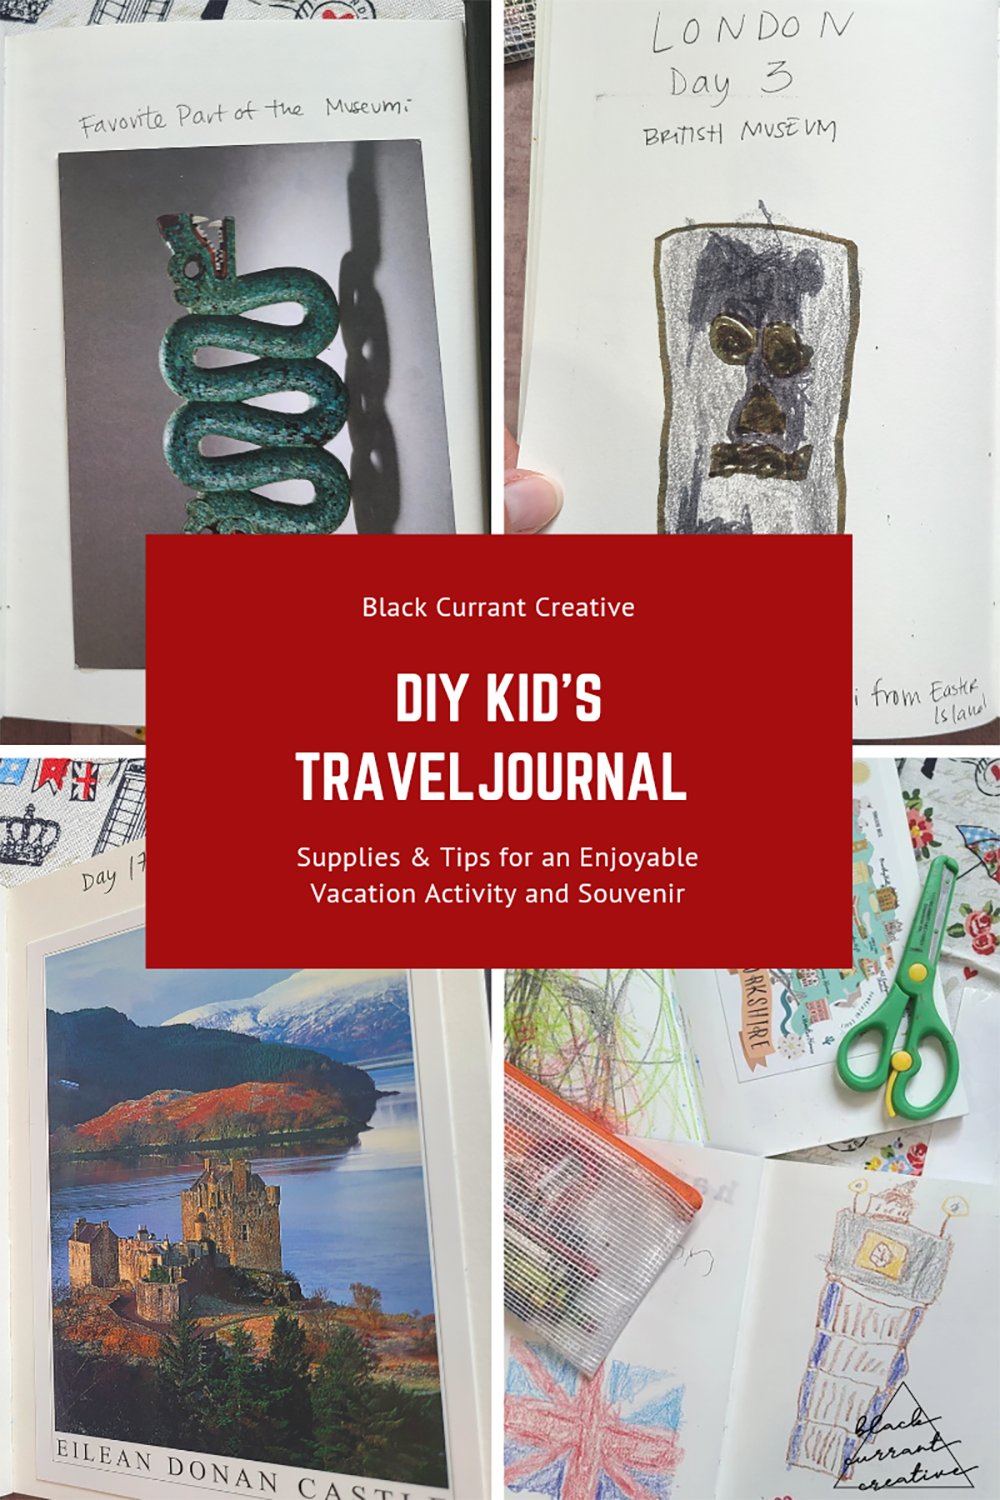 How to make a travel journal for your child: An easy DIY memento of your  travels